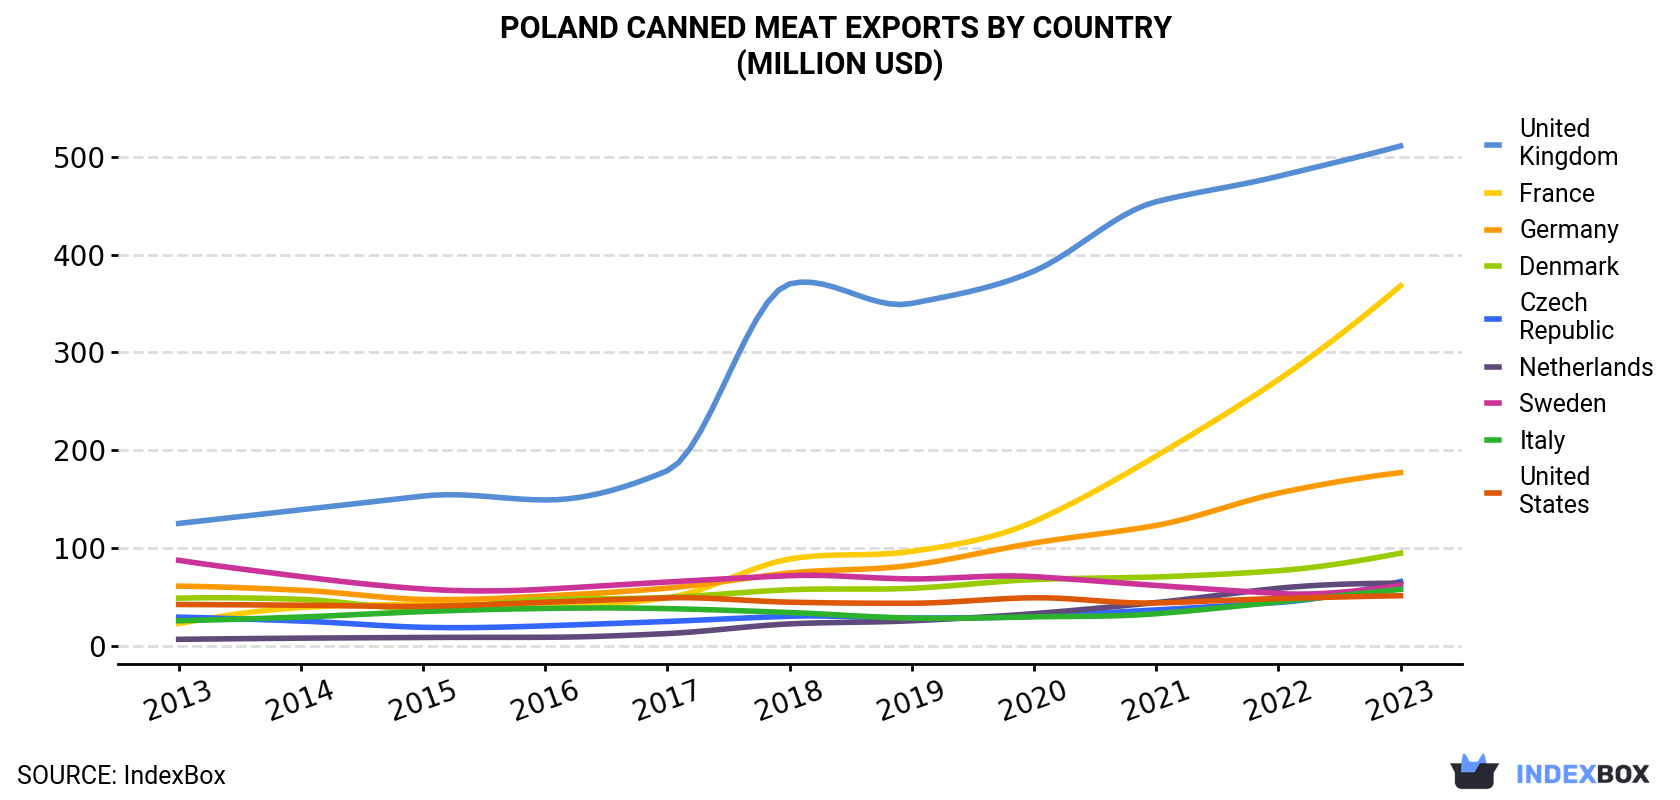 Poland Canned Meat Exports By Country (Million USD)